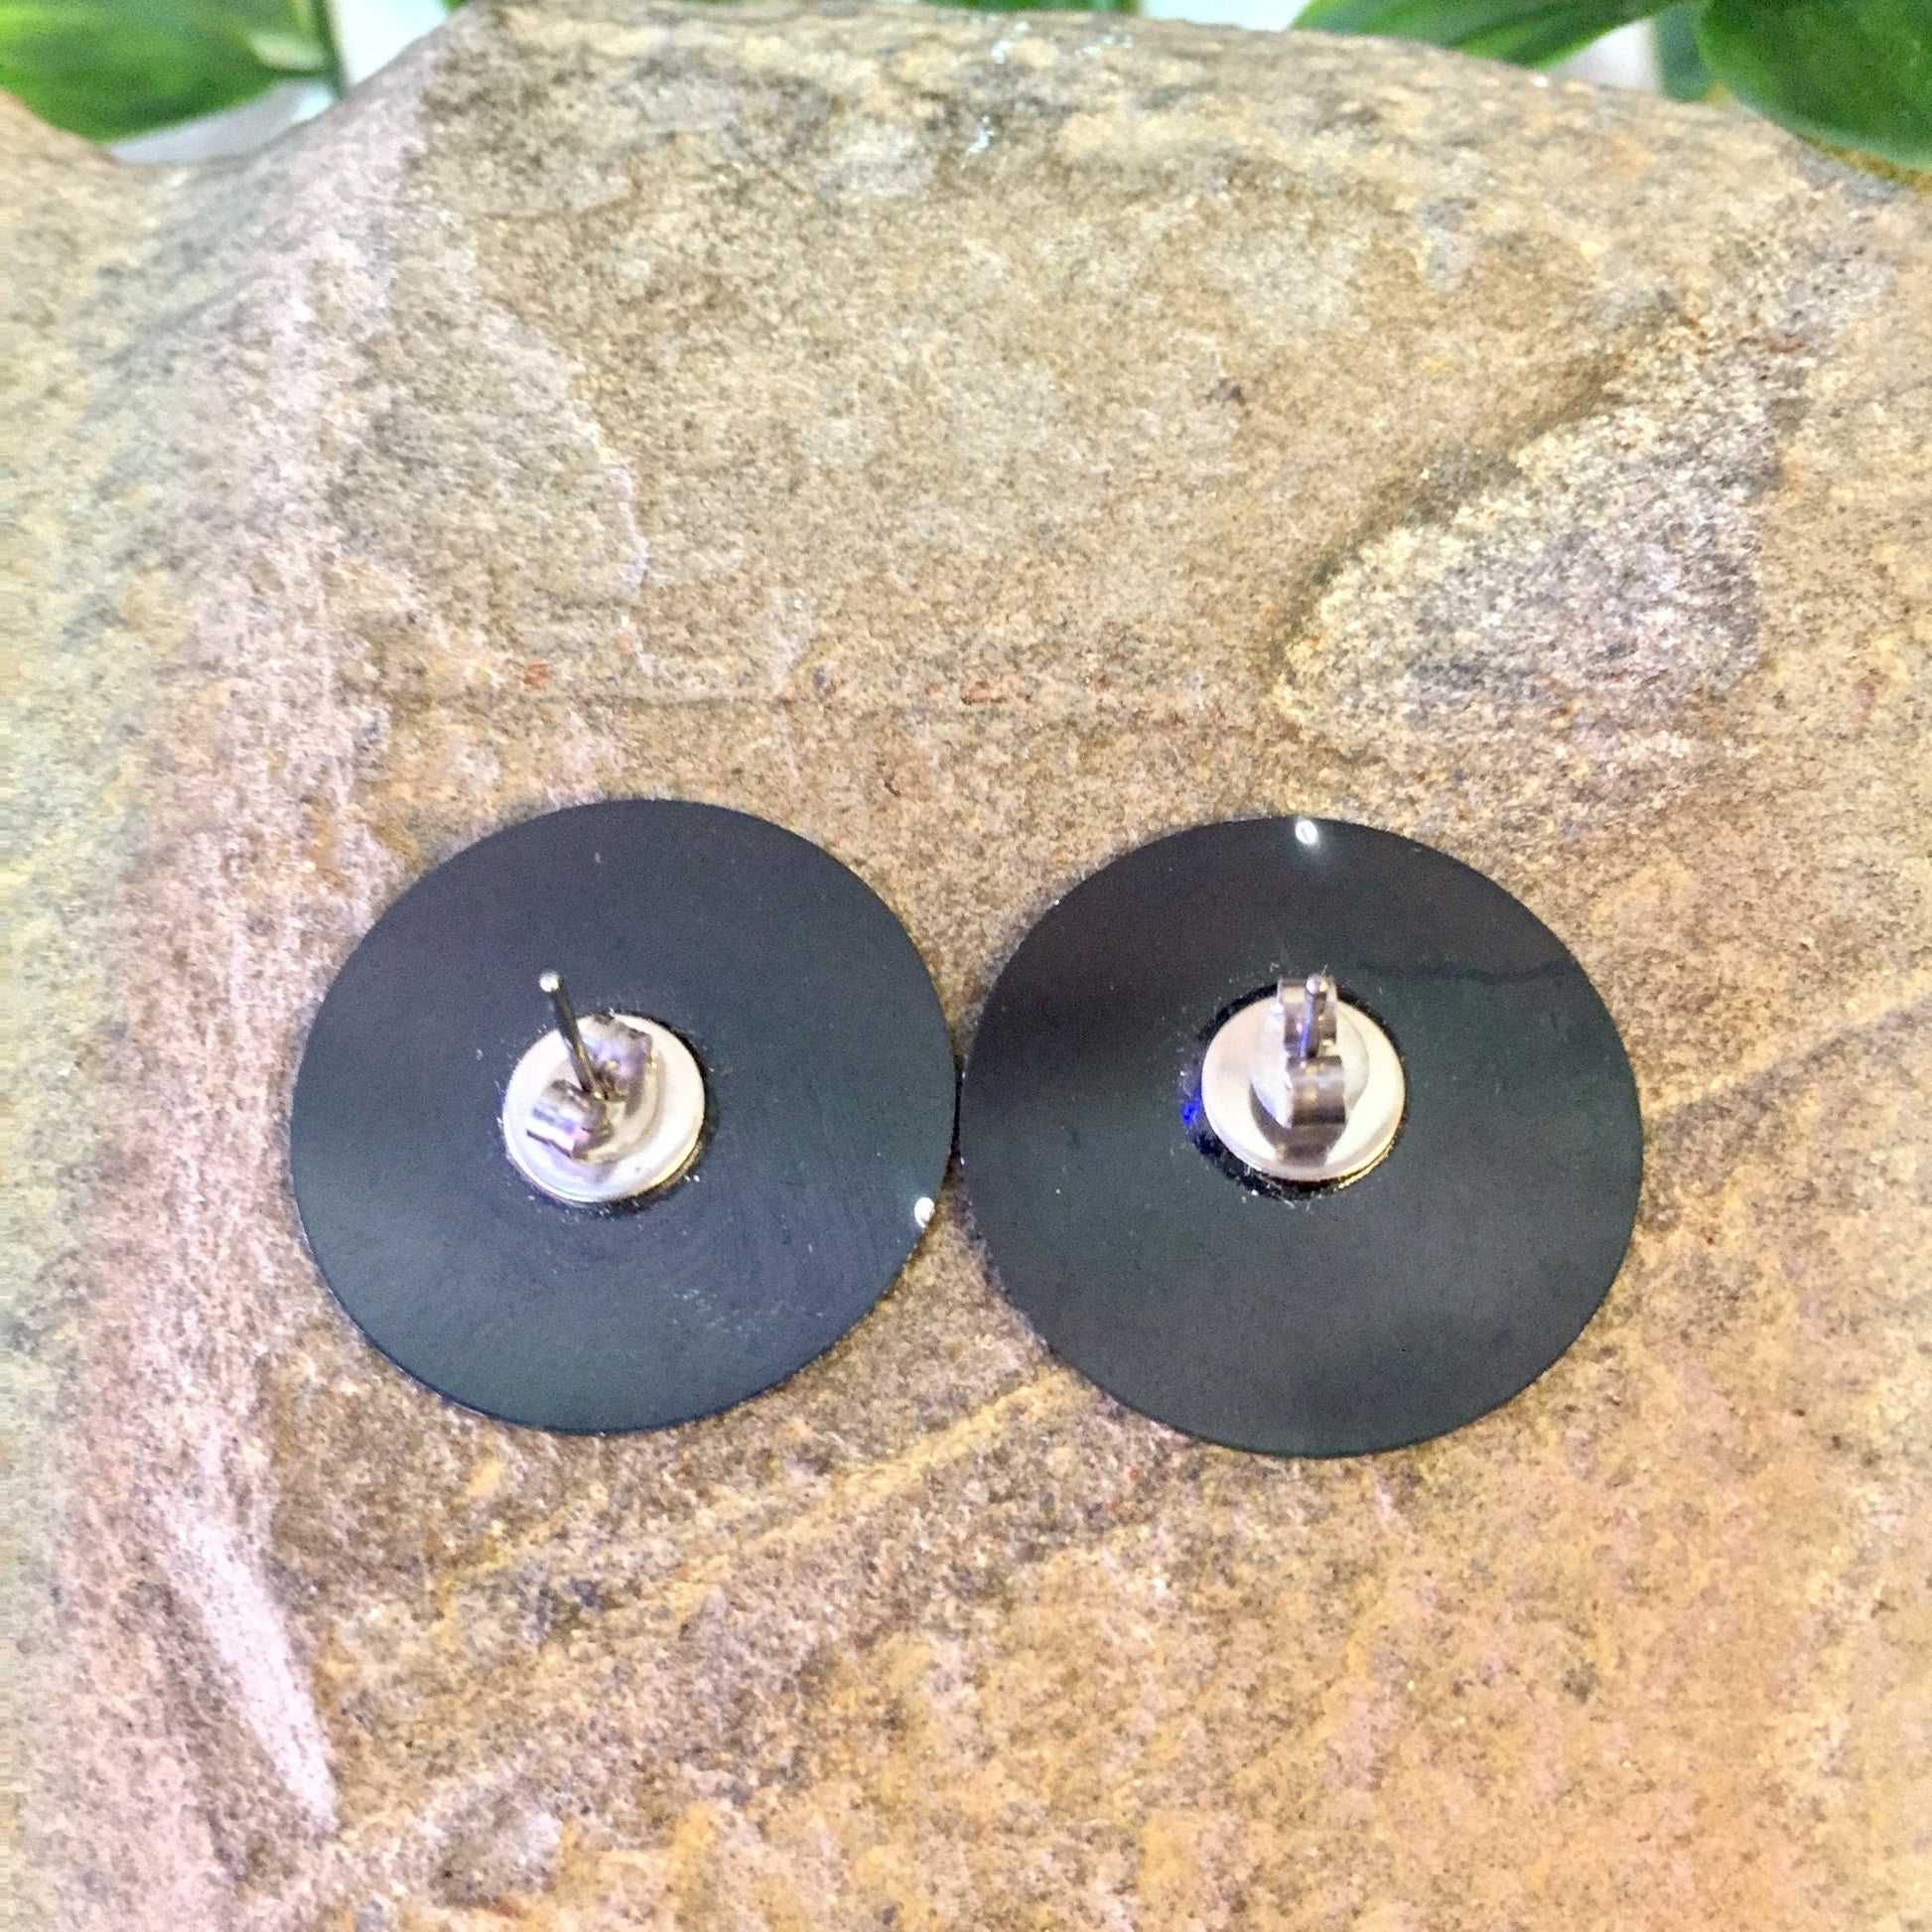 Vintage black disc earrings with small clock face design, displayed on stone surface with leaves in background.